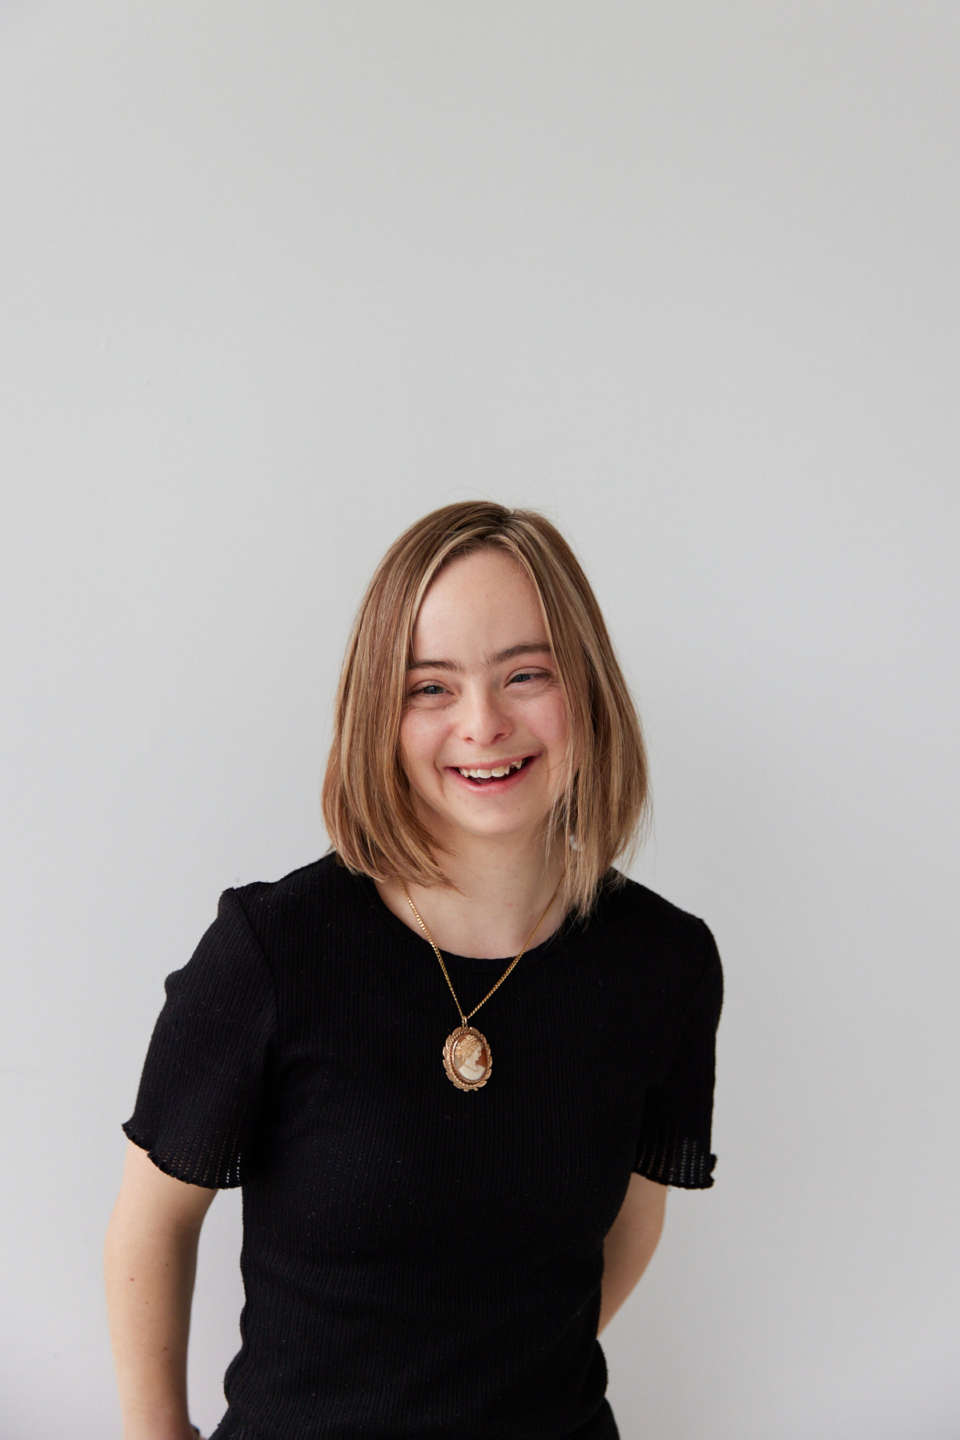 Amelia lives with down syndrome she's smiling in front of a white wall